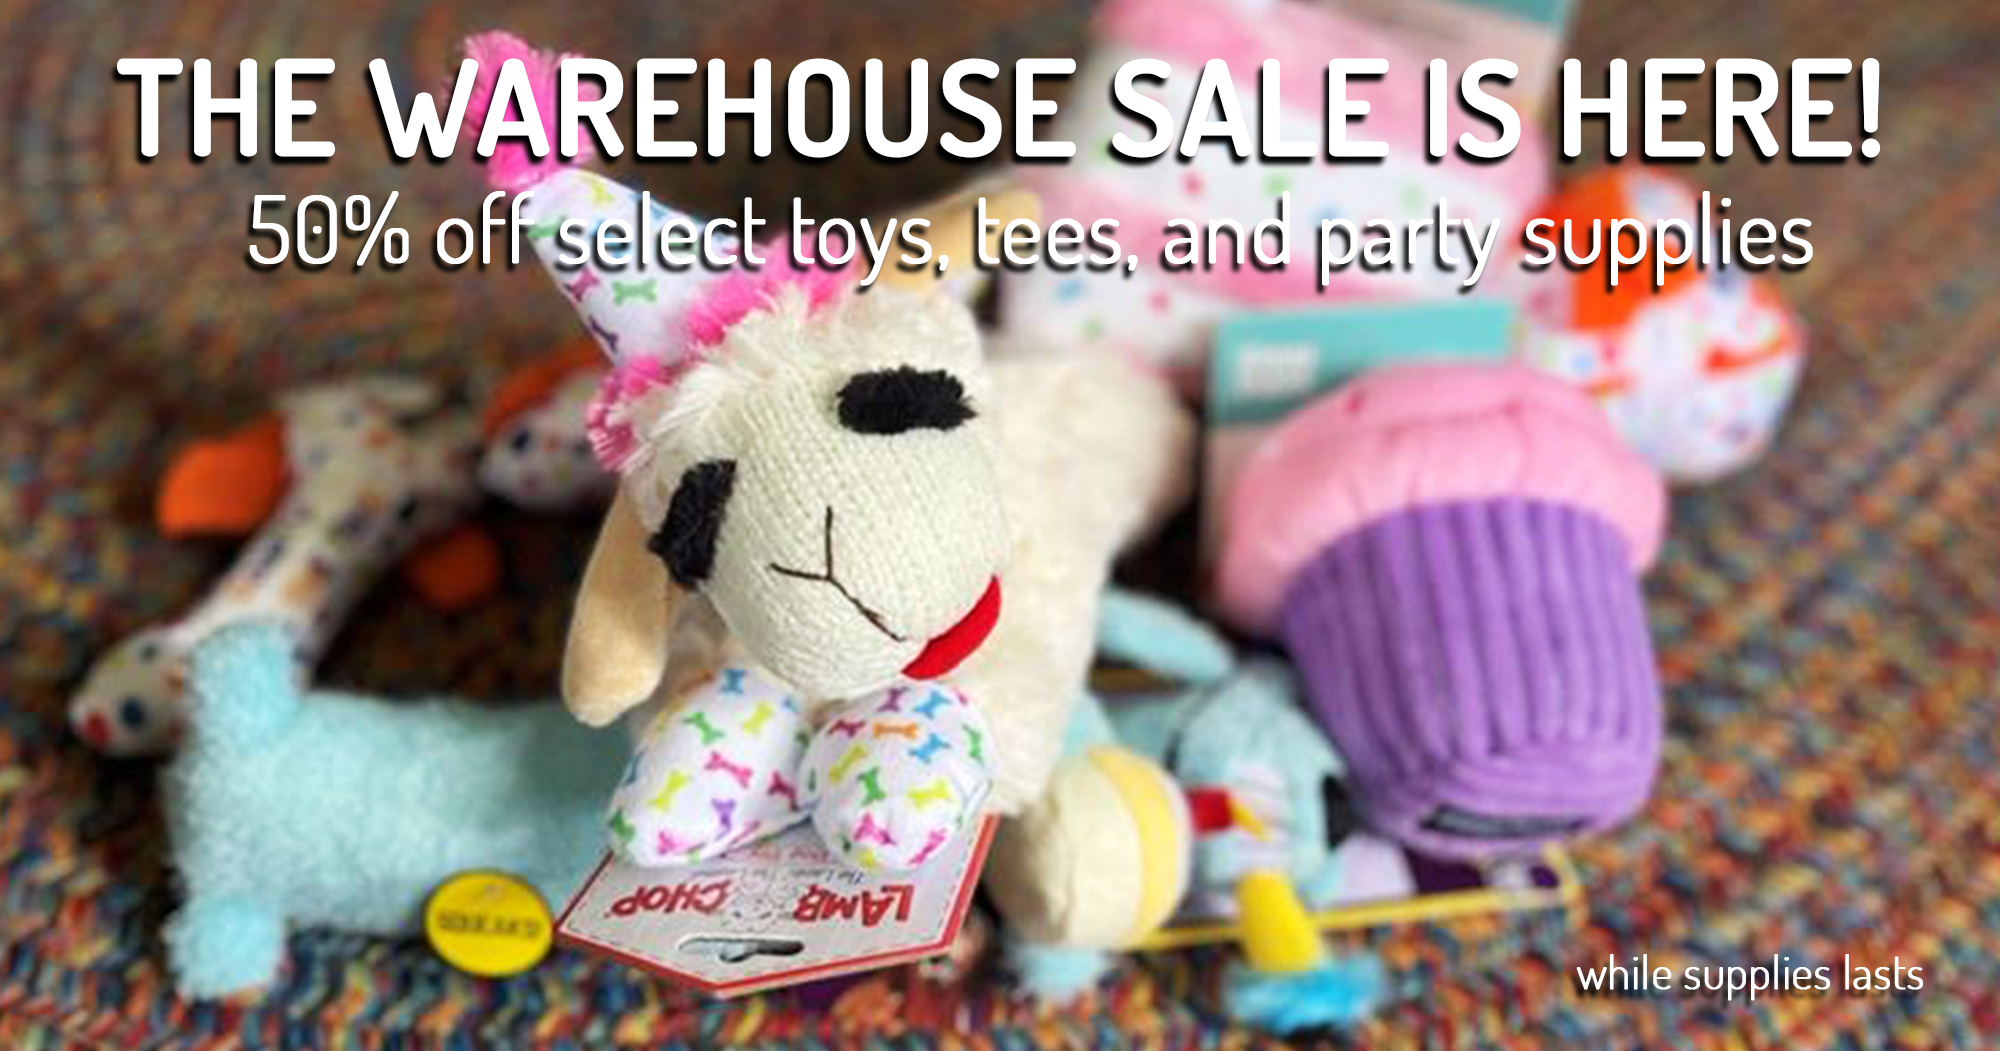 Additional 50% off on  Warehouse products!